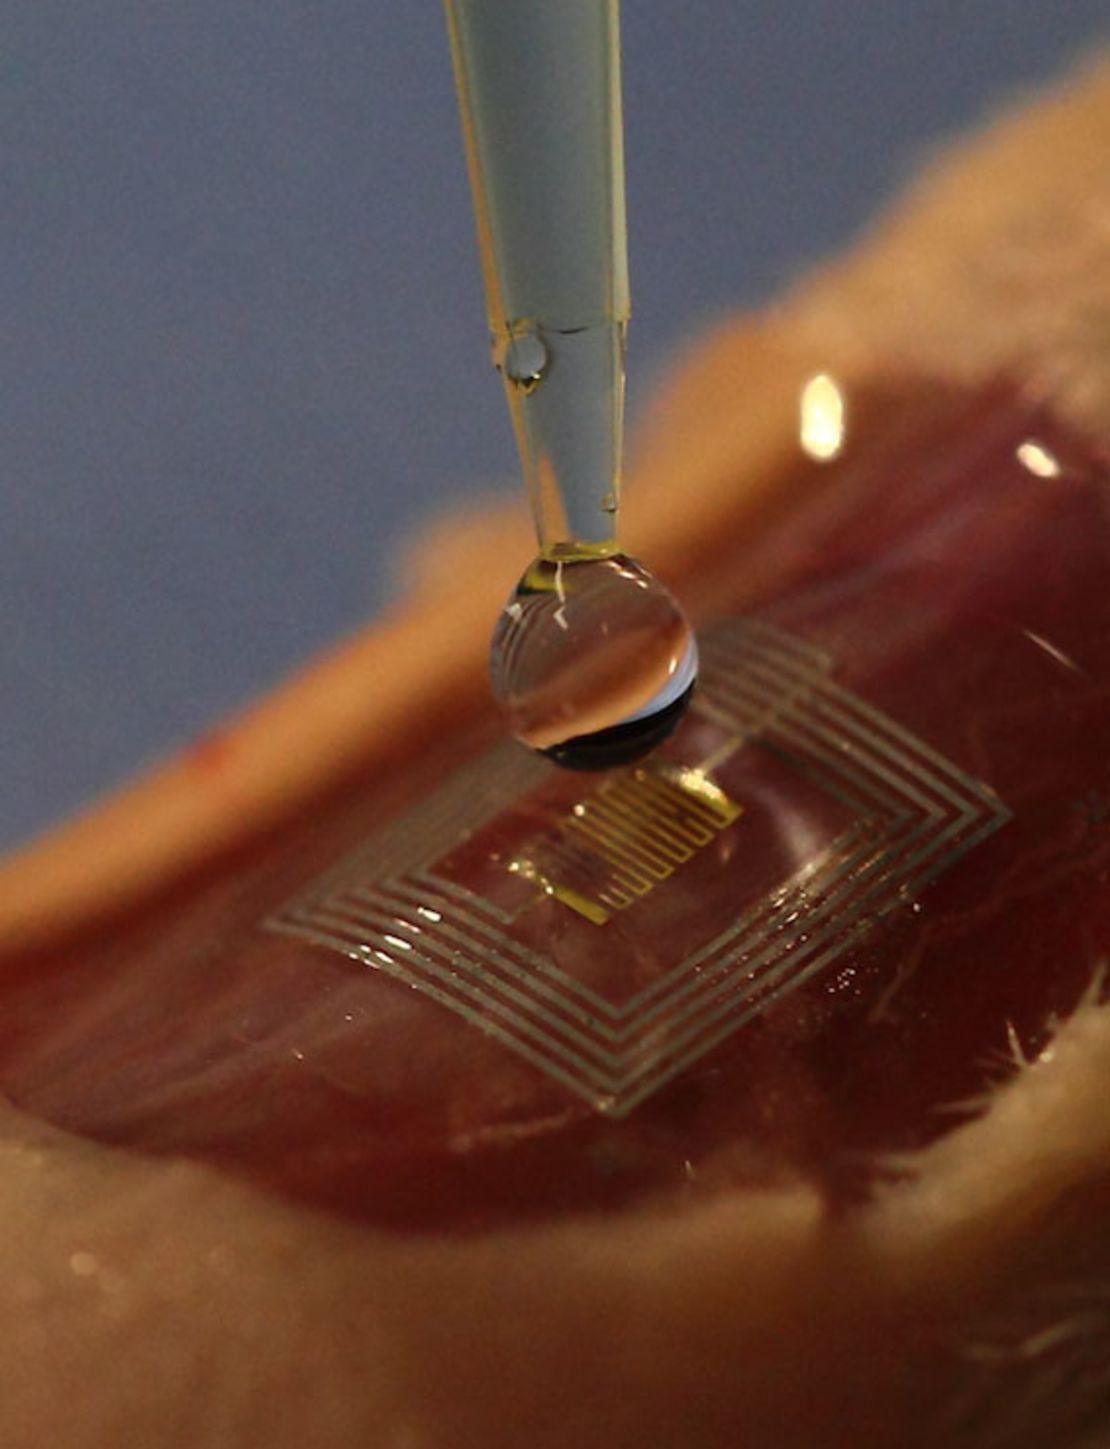 This healing silk 'microchip' could be implanted under the skin.